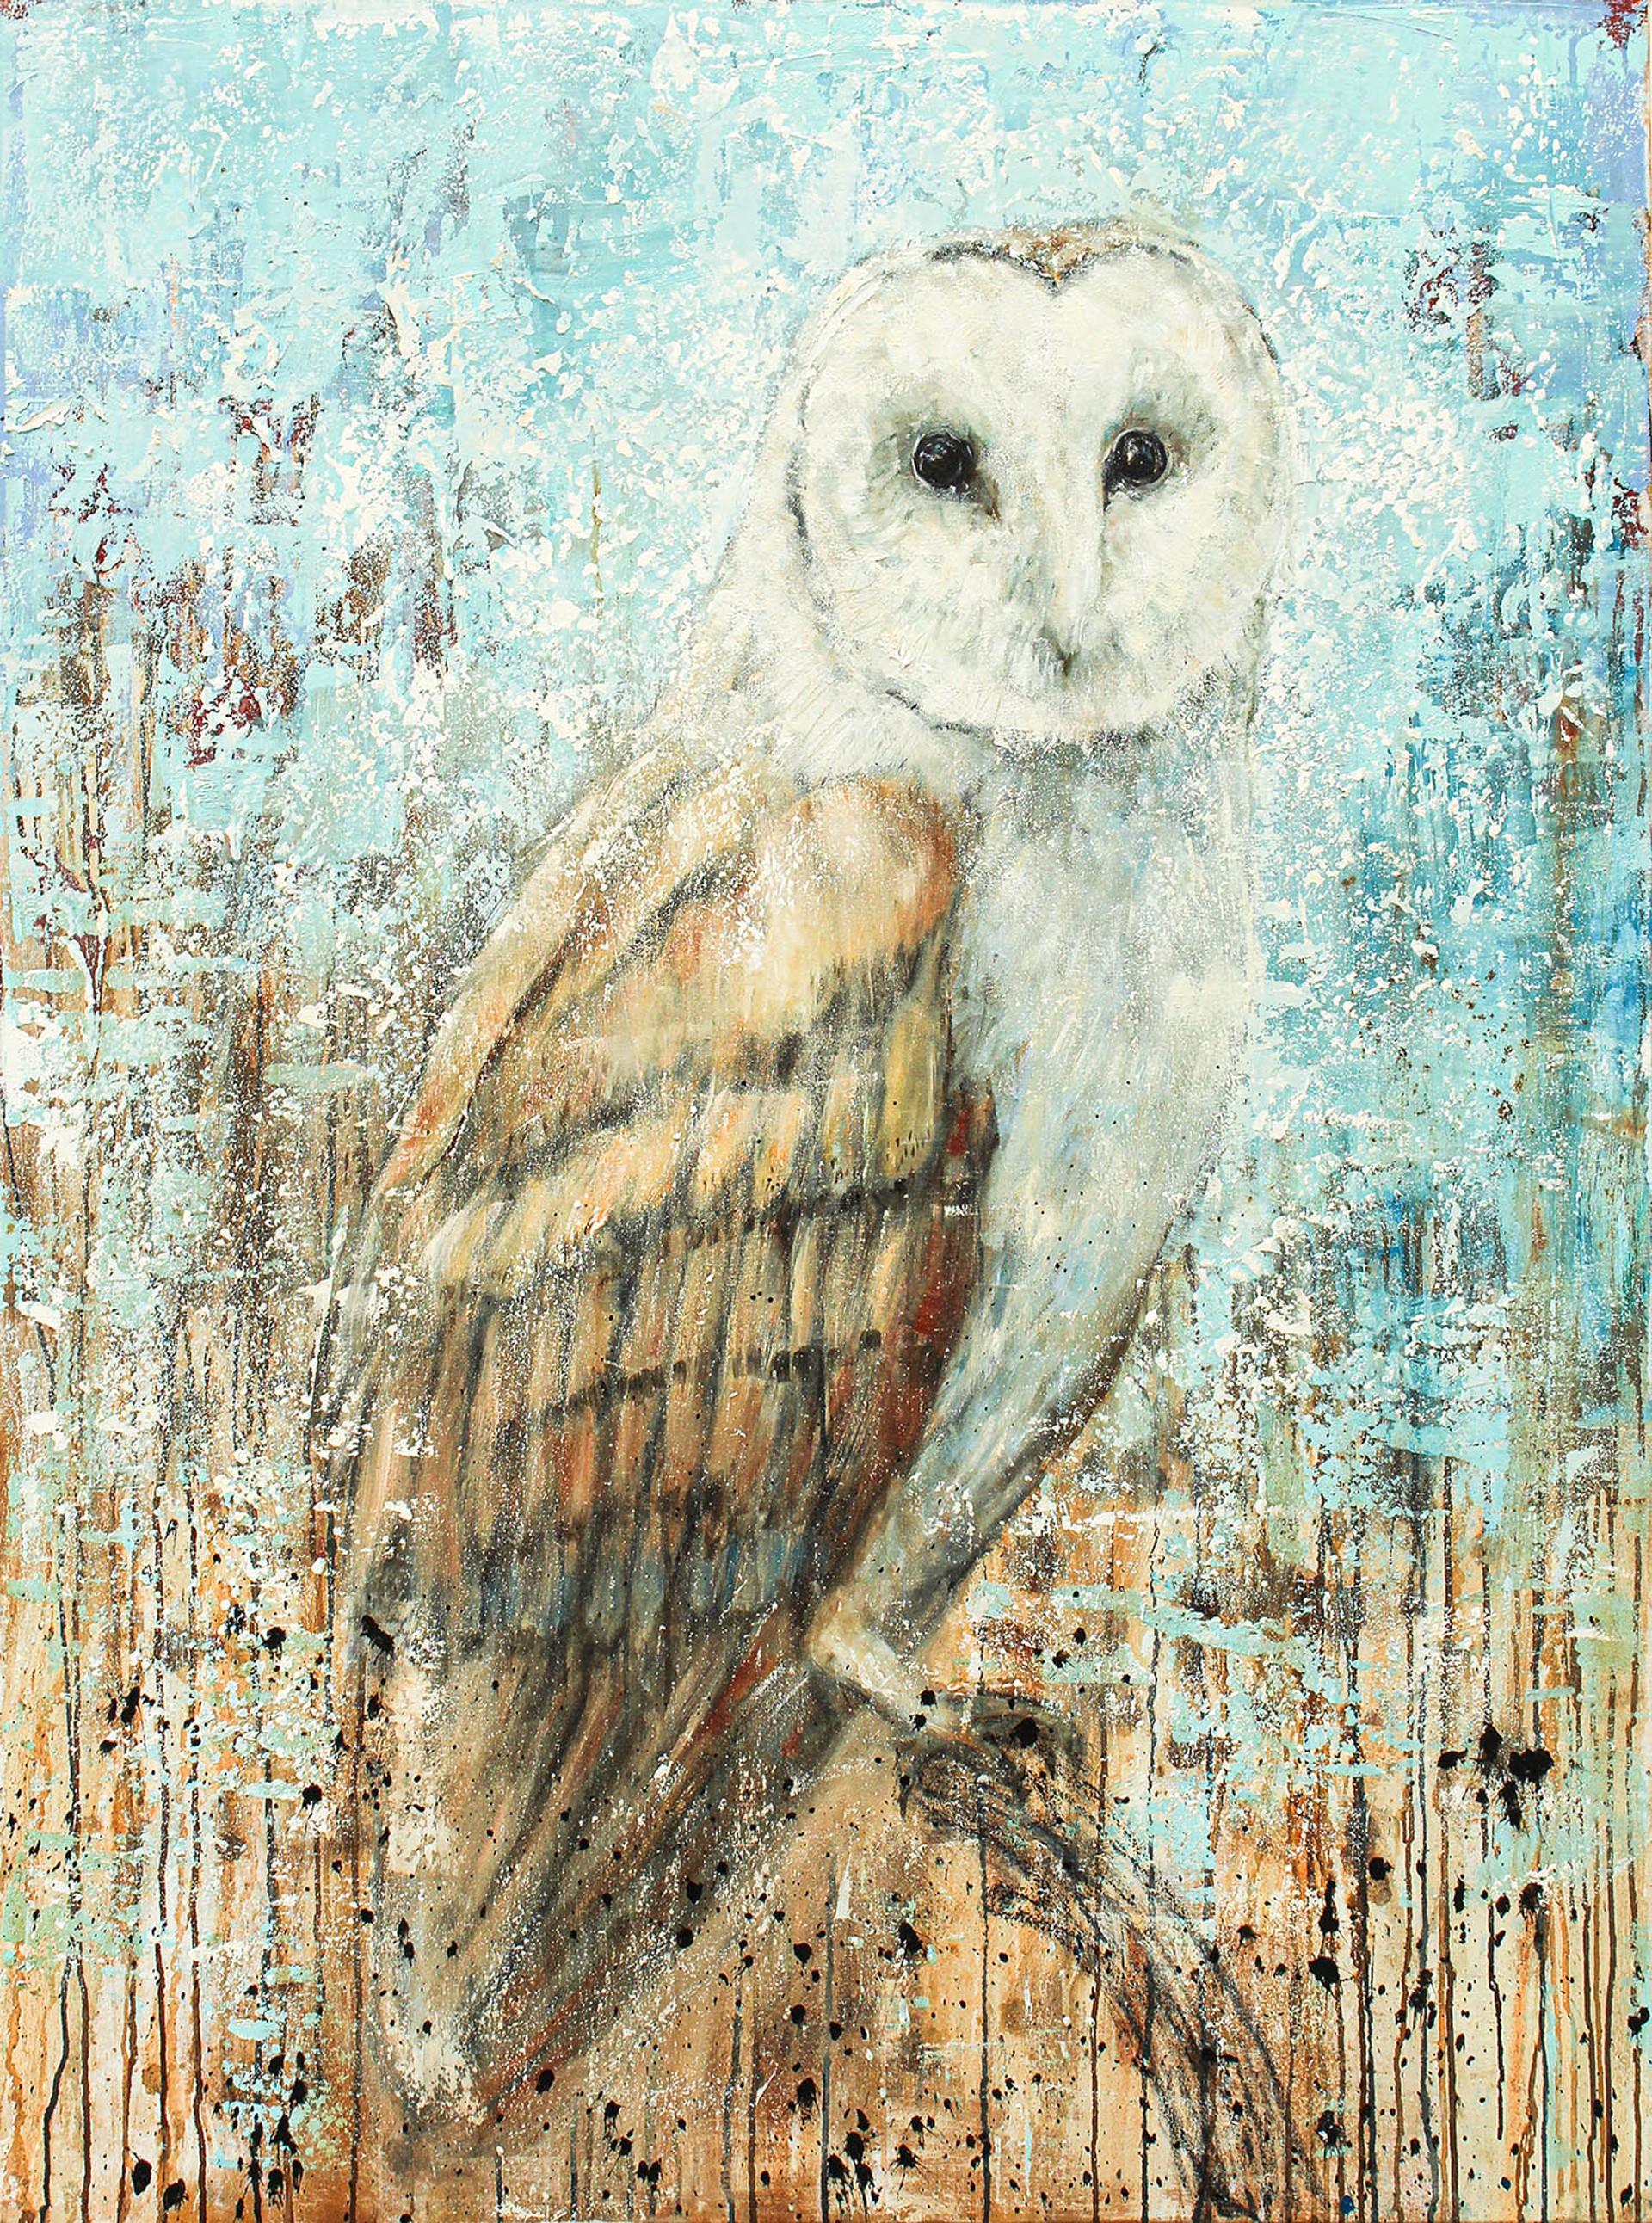 Original Mixed Media Painting Featuring A Snowy Owl On Abstract Blue To Brown Gradient Background With Dripping Details